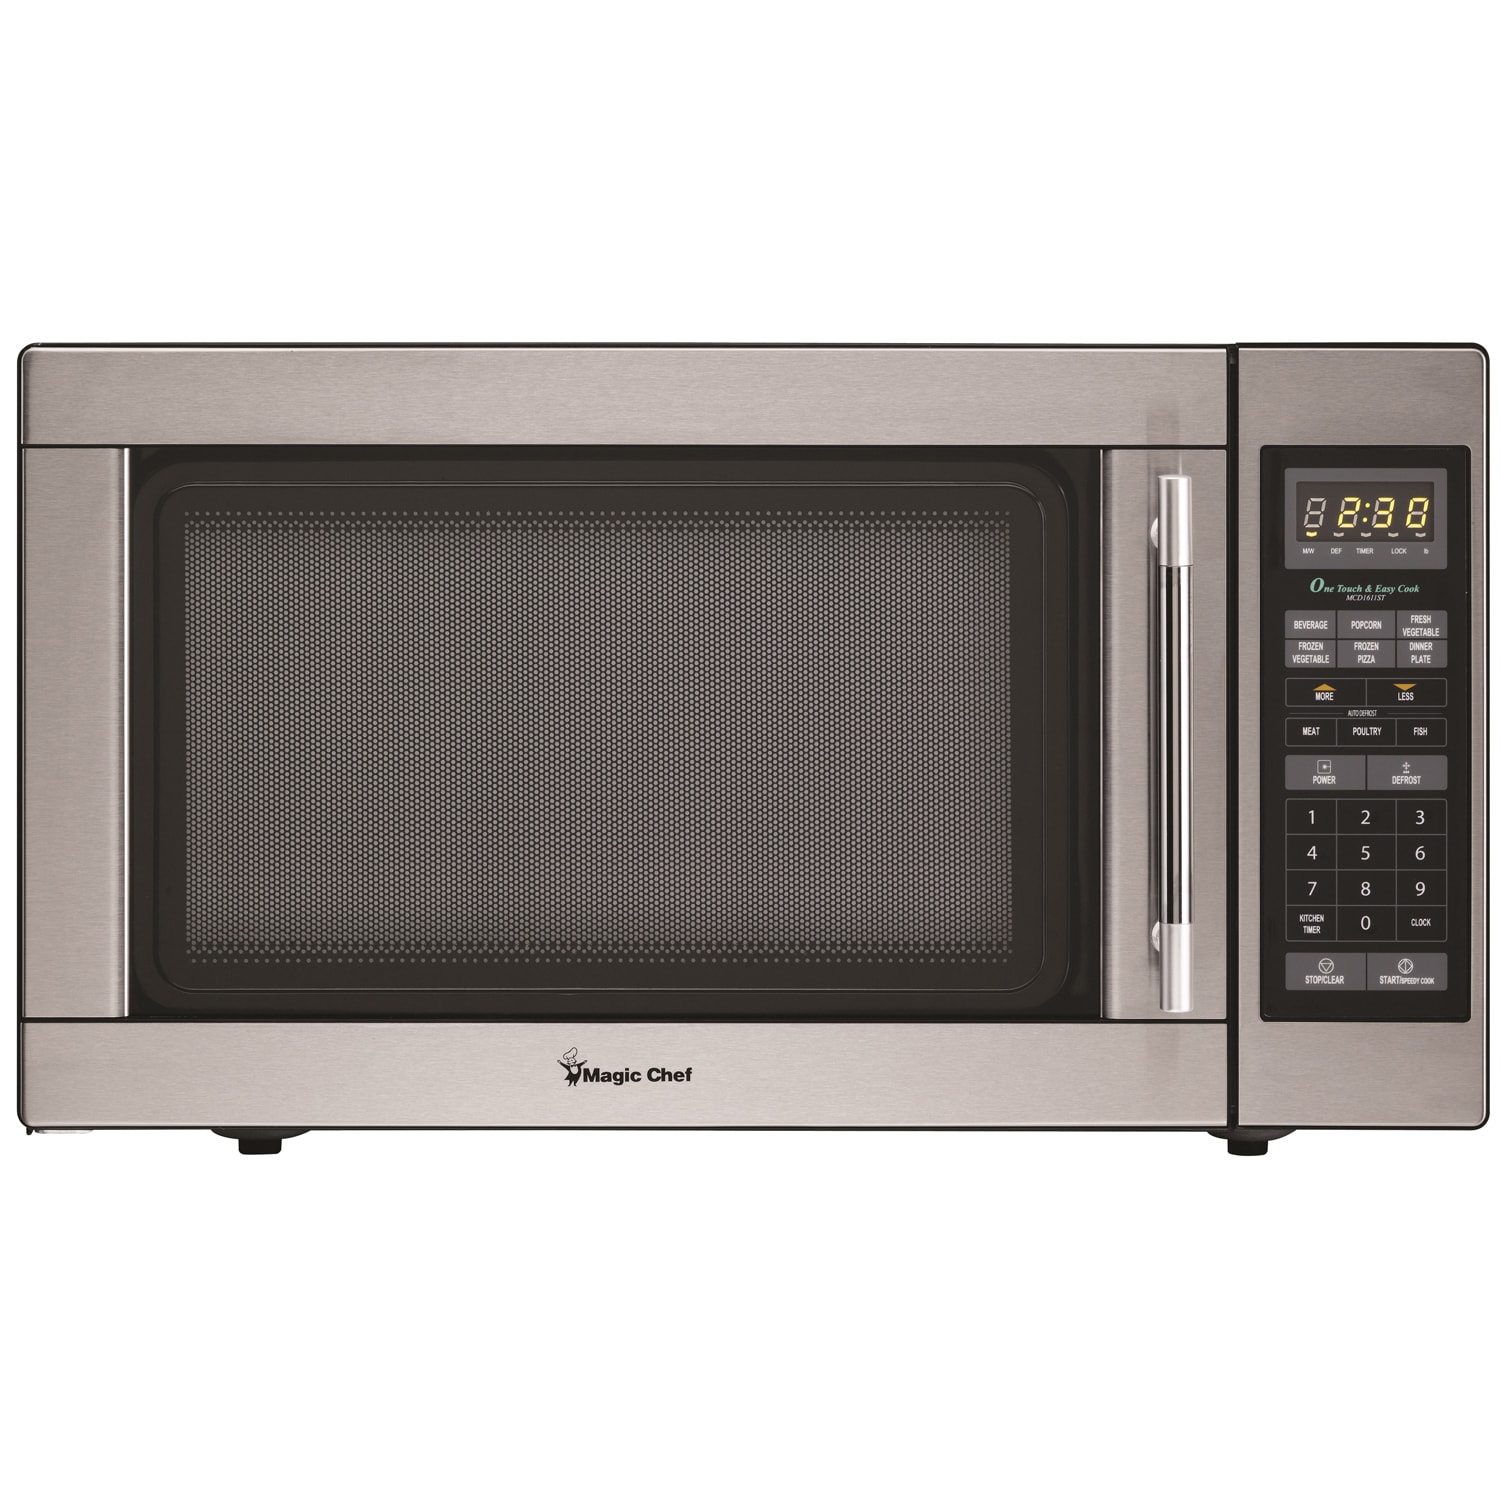 Magic Chef Mcm1611st 1.6 Cu ft Countertop Microwave, Stainless Steel